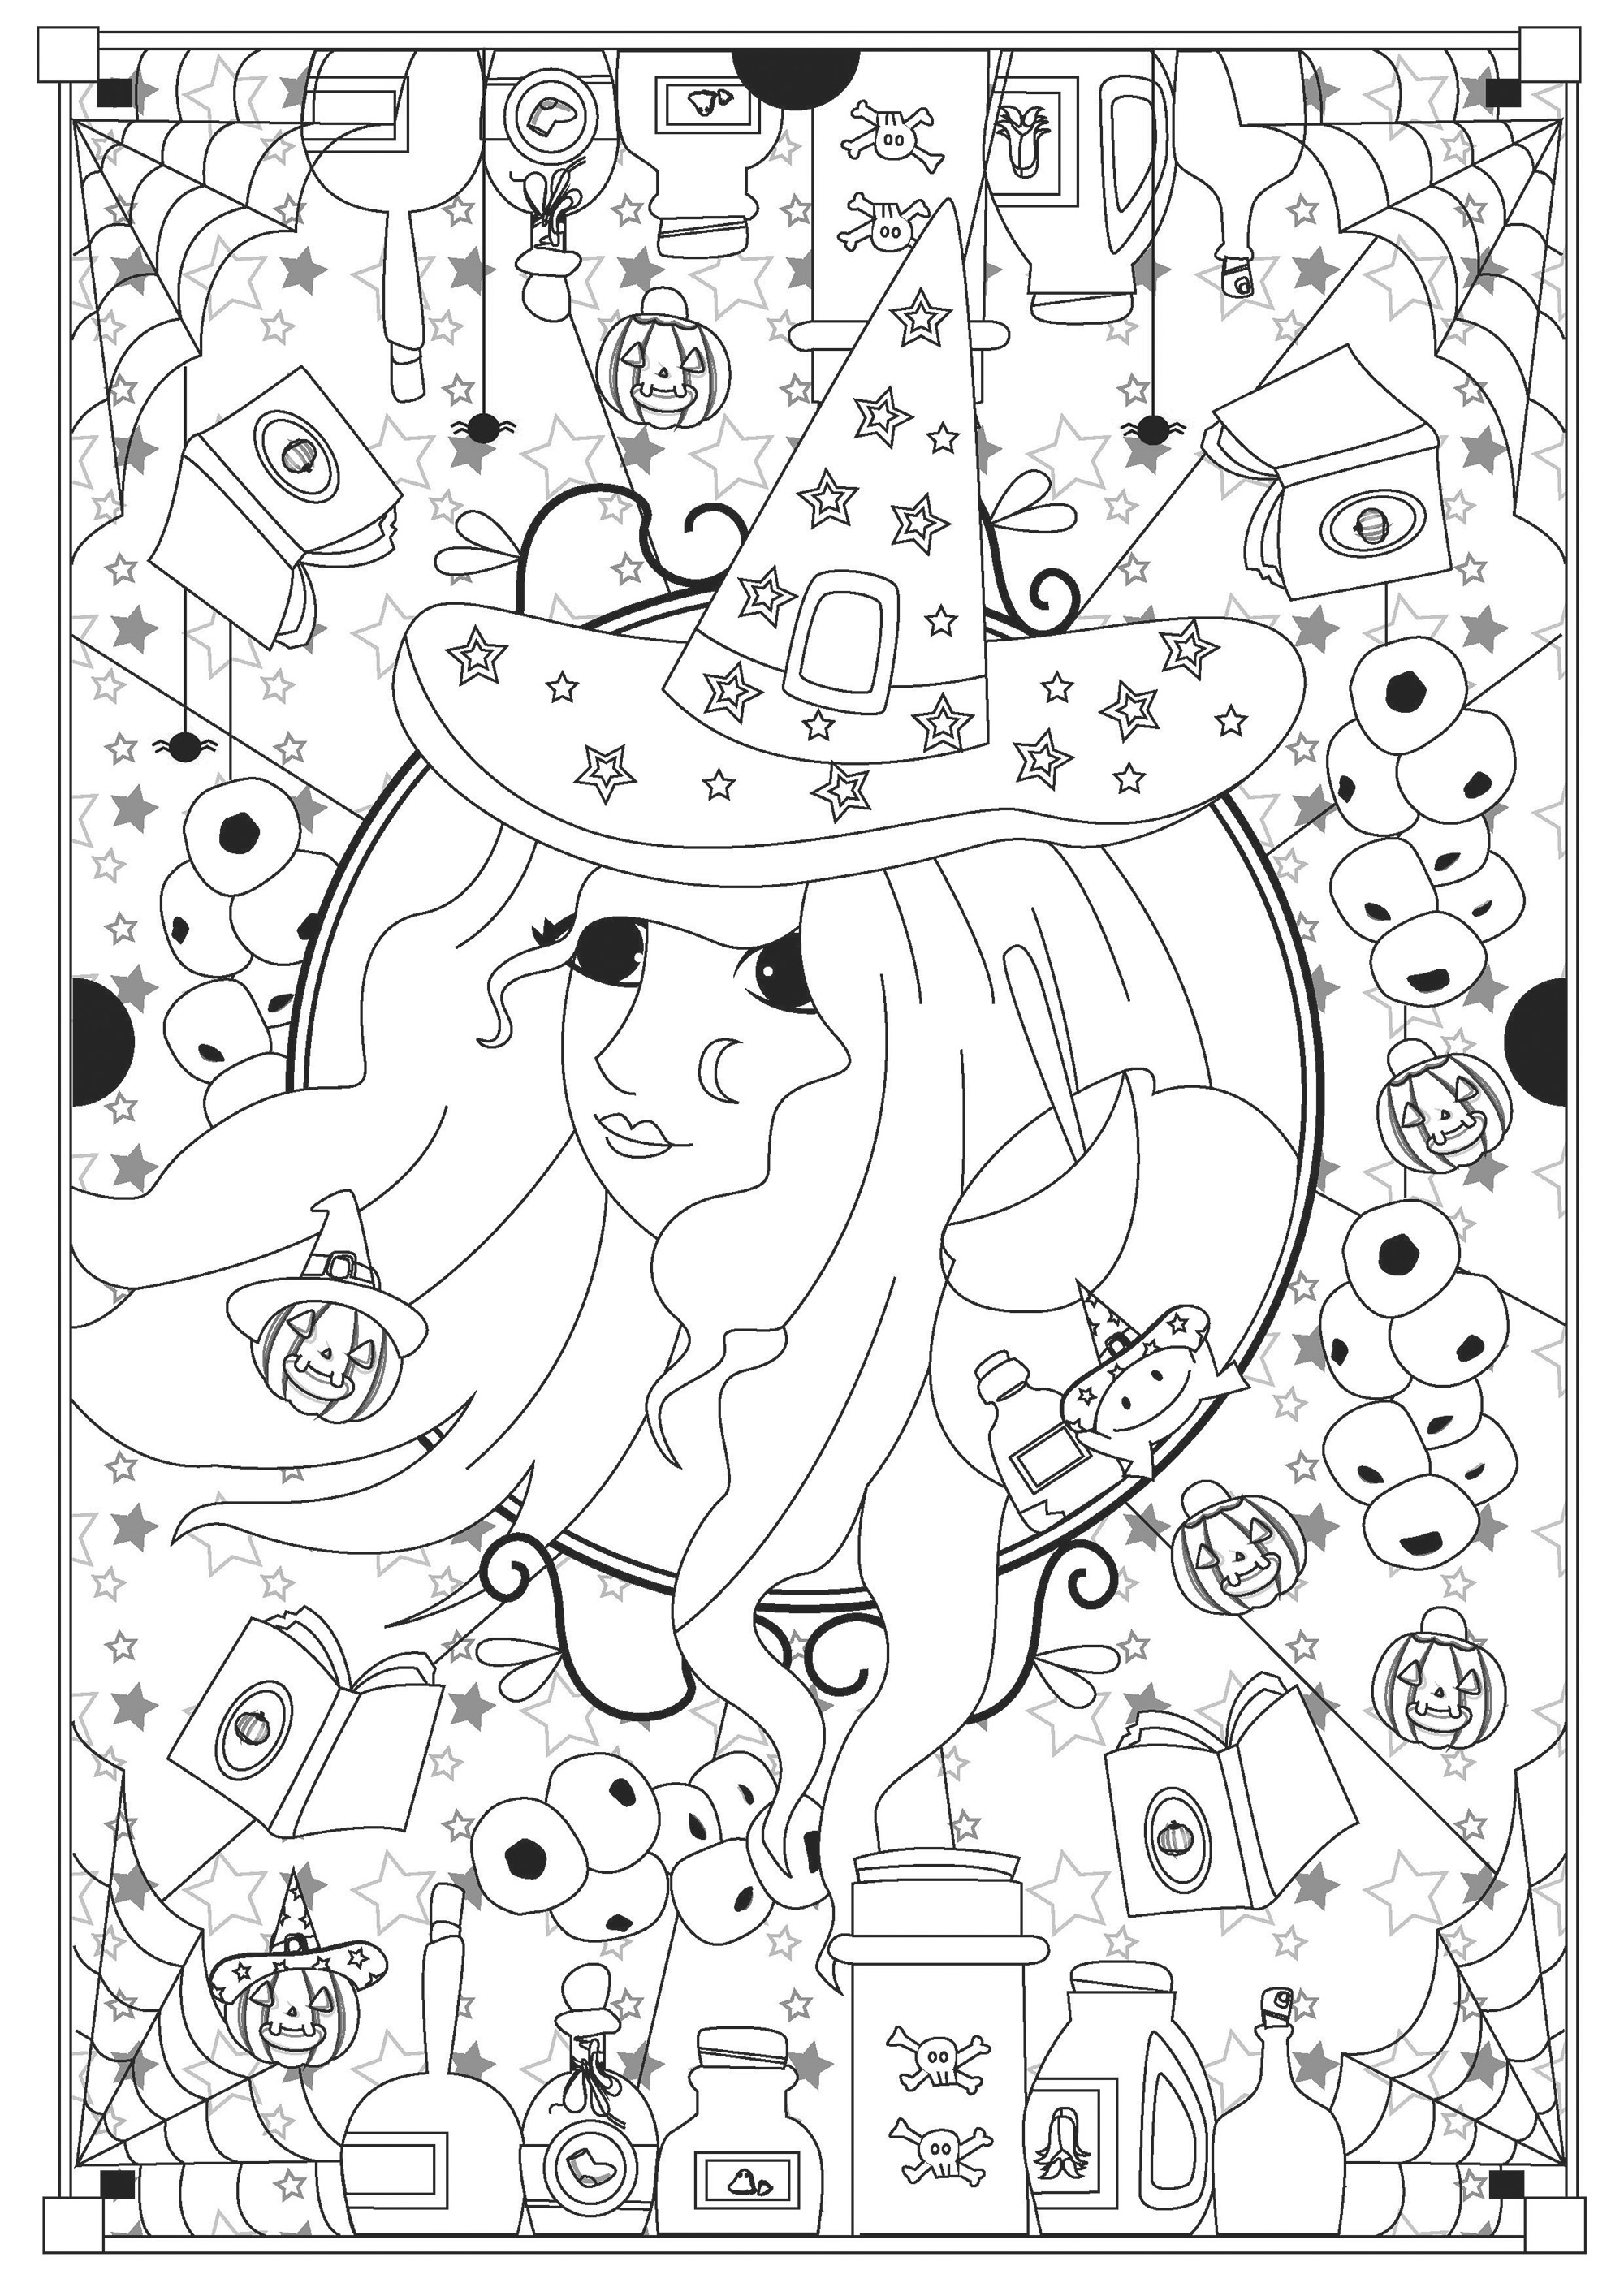 Witches, potions and spell books. Color this witch and the many evil elements surrounding her, Artist : Gaelle Picard